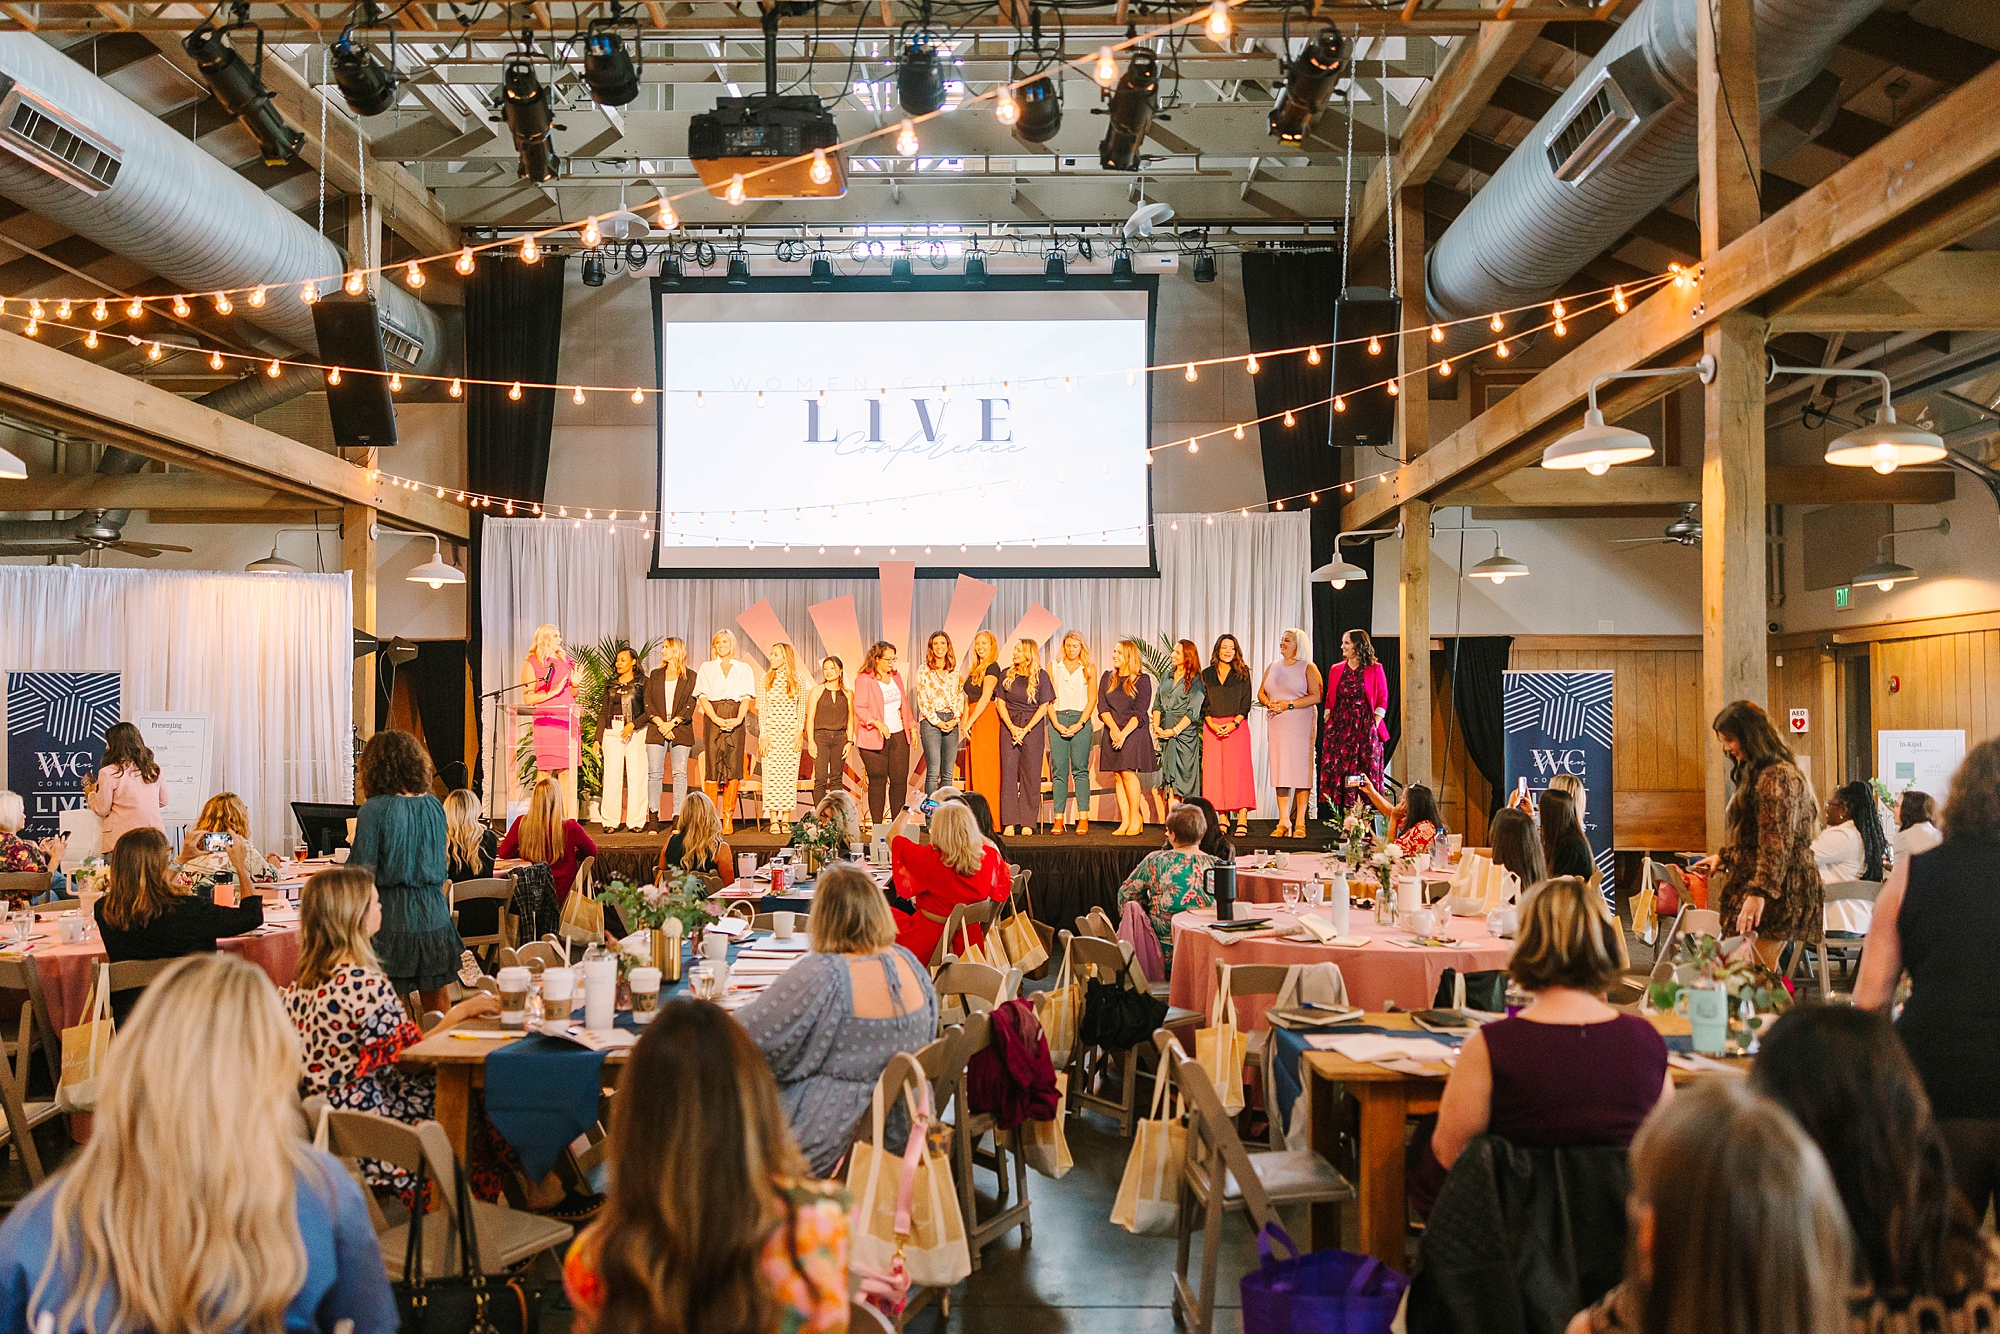 speakers present during 2023 Tennessee Women Connect Live Event at Loveless Barn